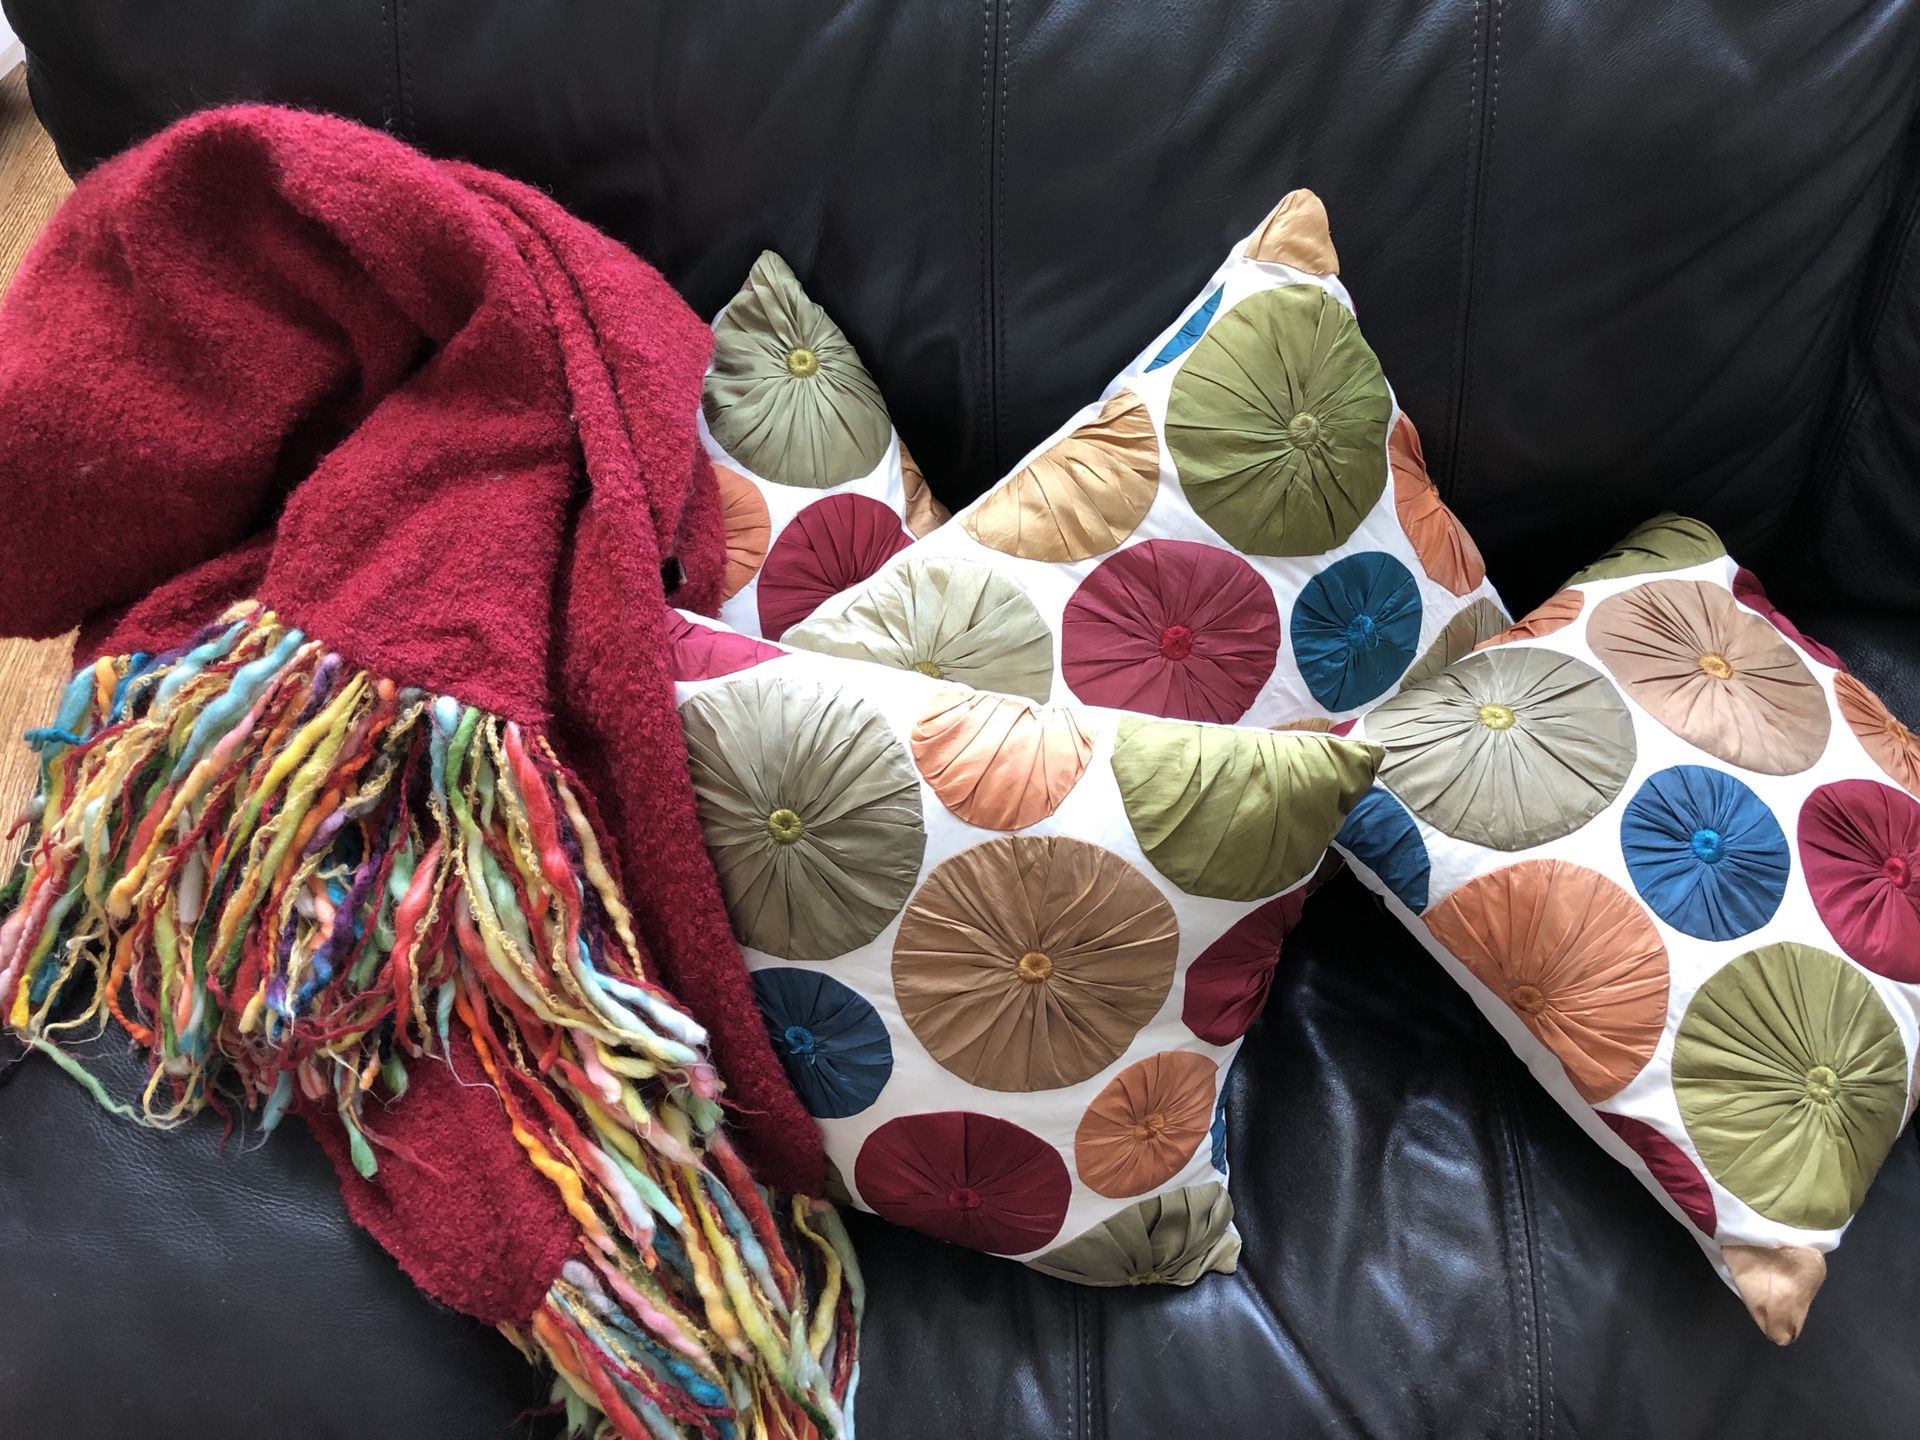 4 Pillows and 1 Throw Blanket Pier One Imports